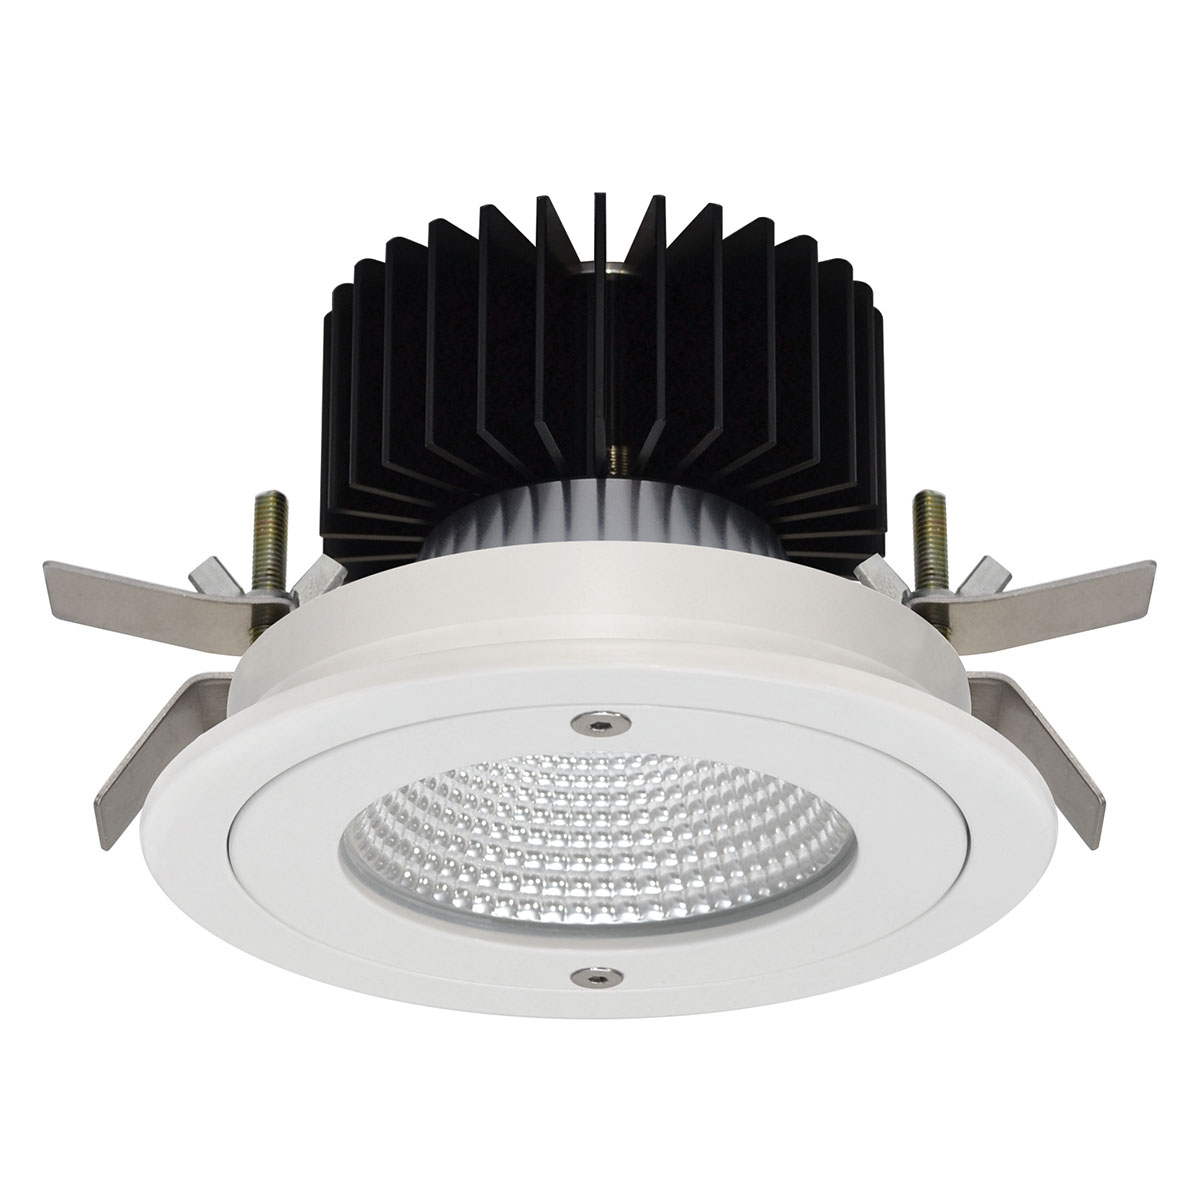 Kopa 18W Anti Tamper Fixed Round Recessed Downlight IP65 Rated 15° Degree Reflector Black